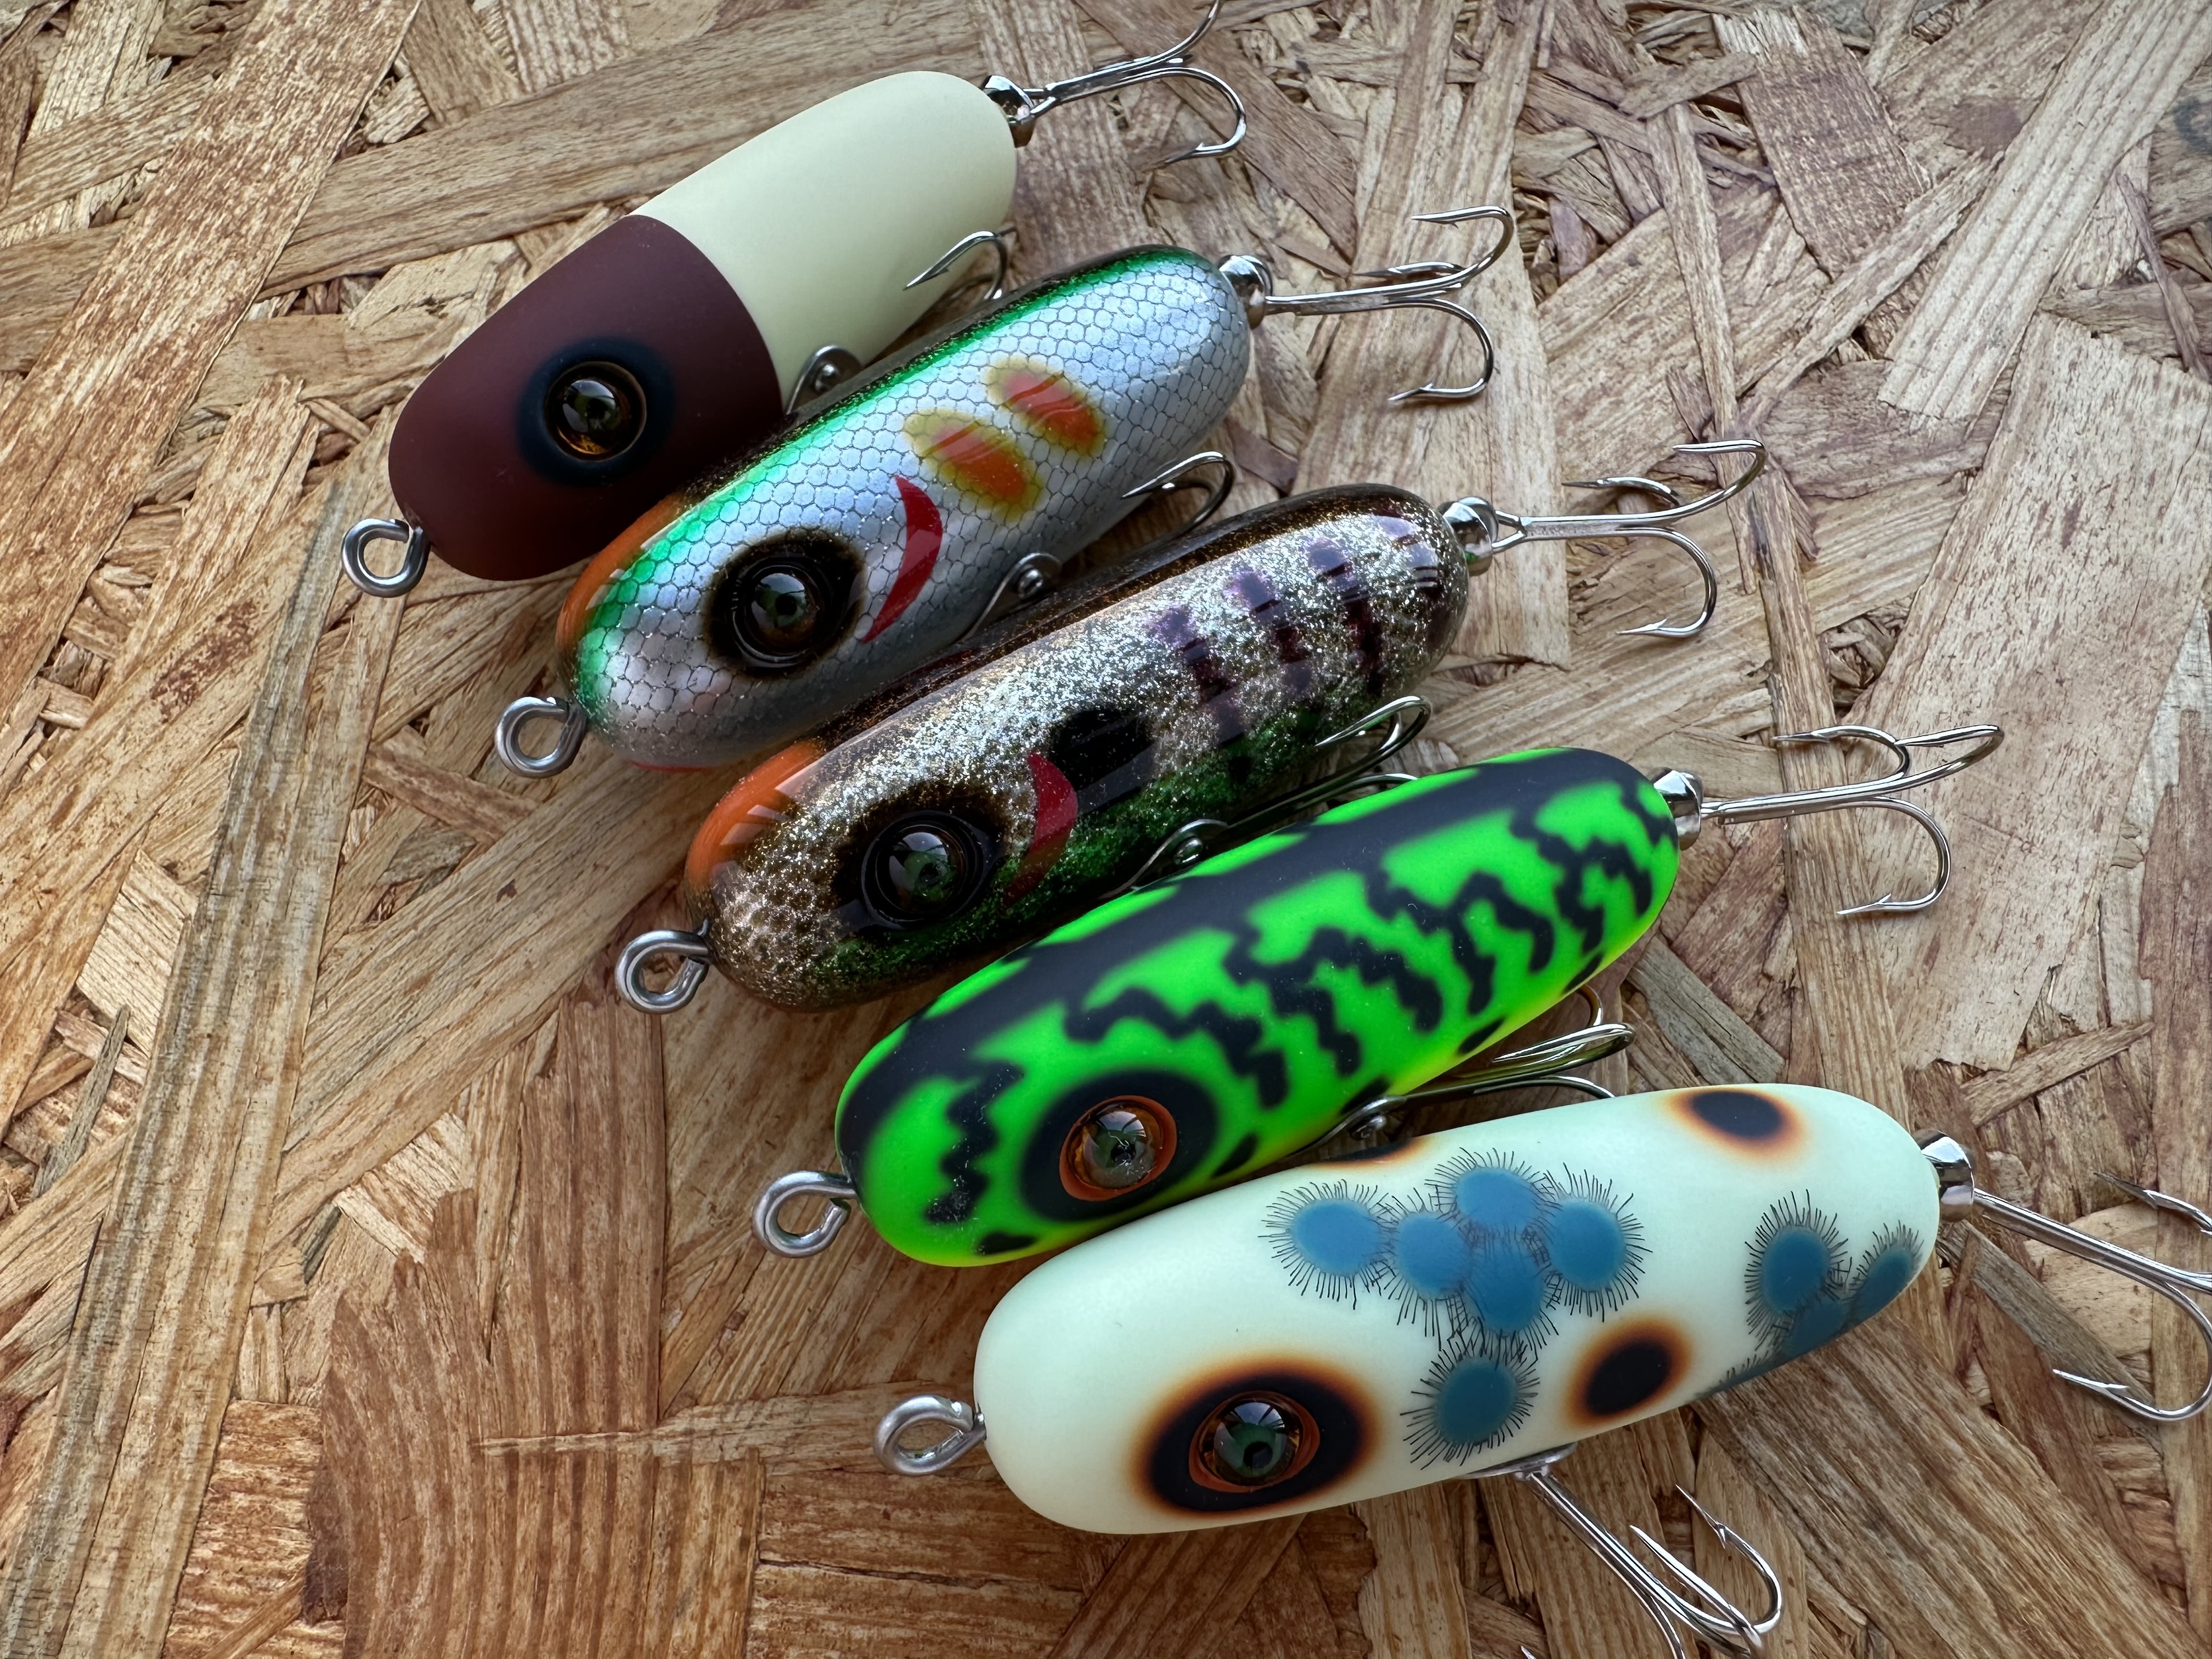 HandSome lures